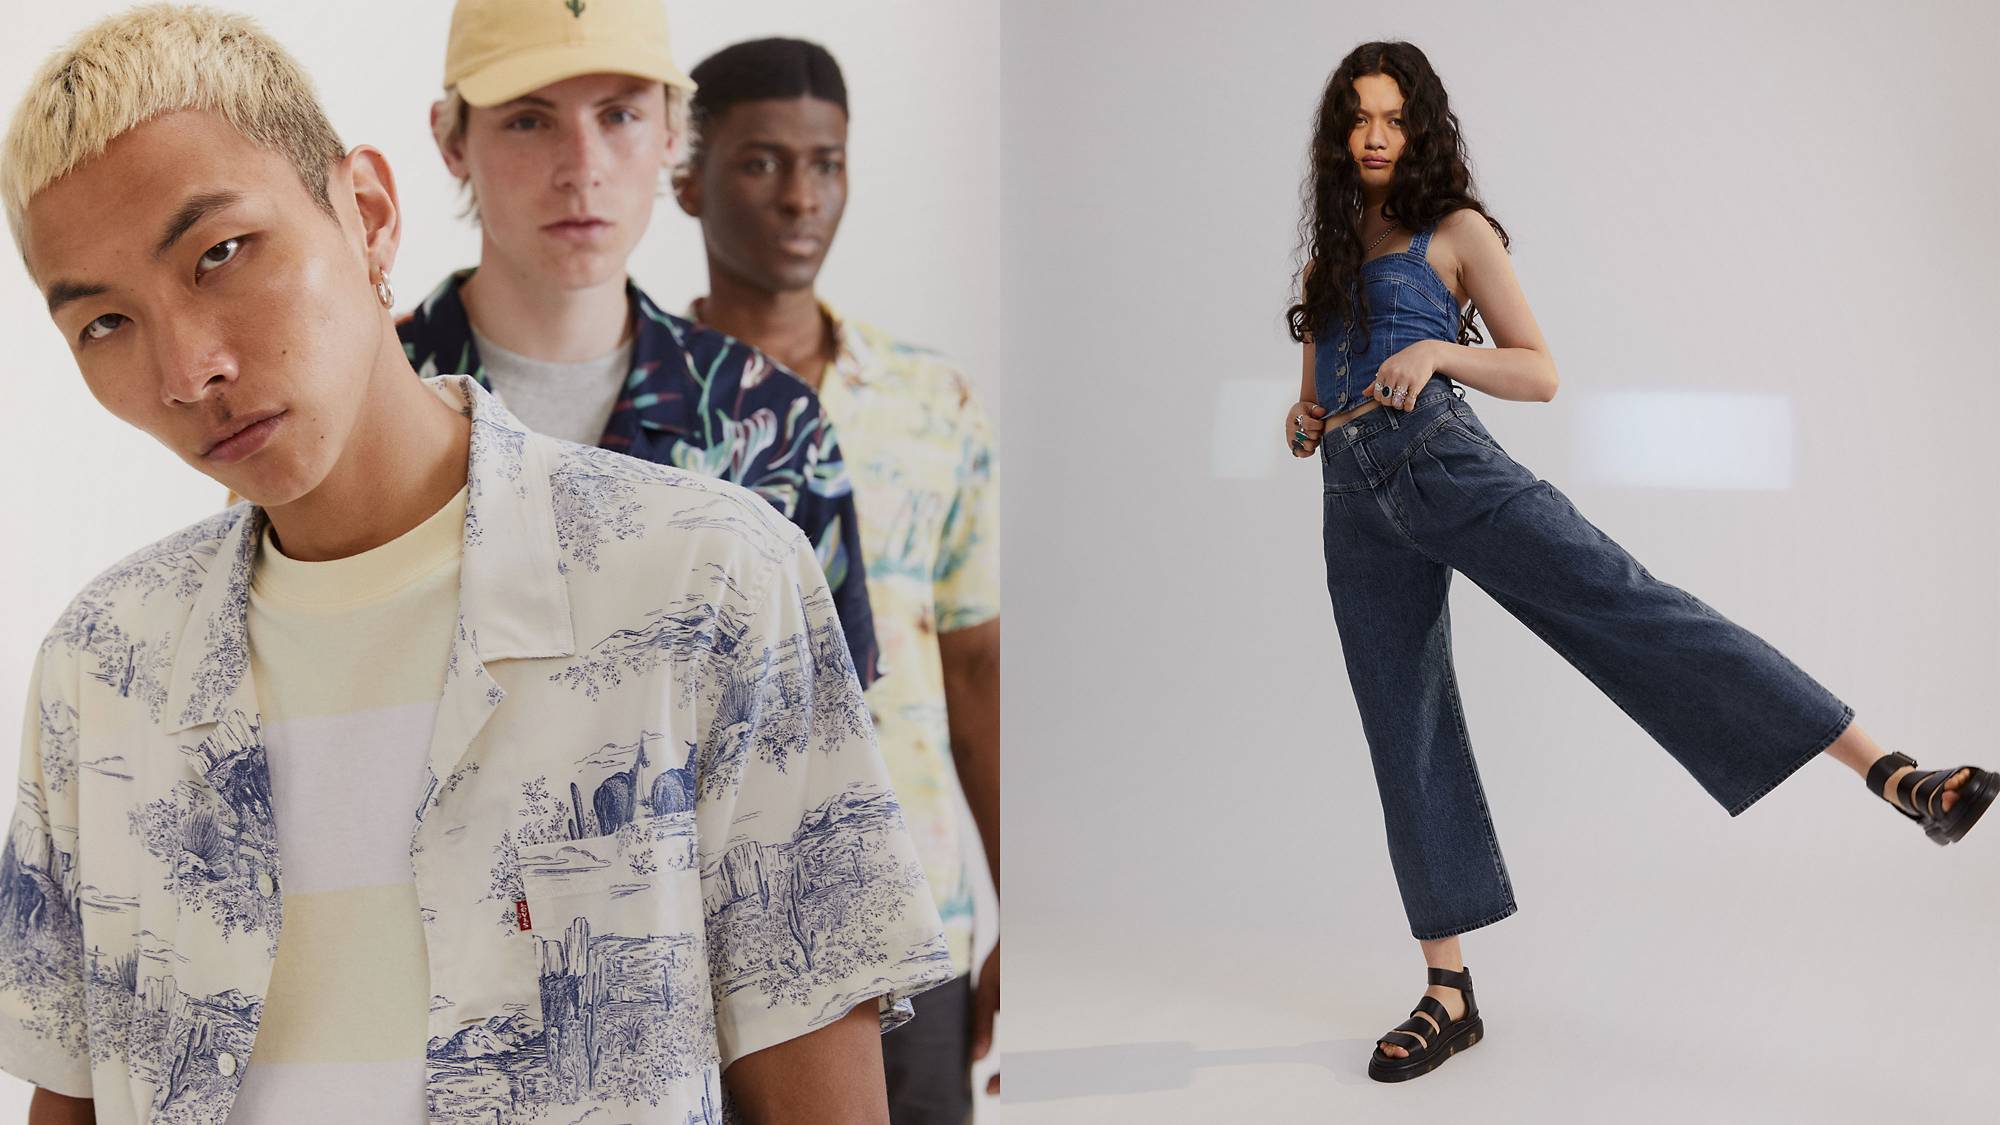 Split screen of models in warm weather styles - men's sunset camp shirts and women's featherweight jeans